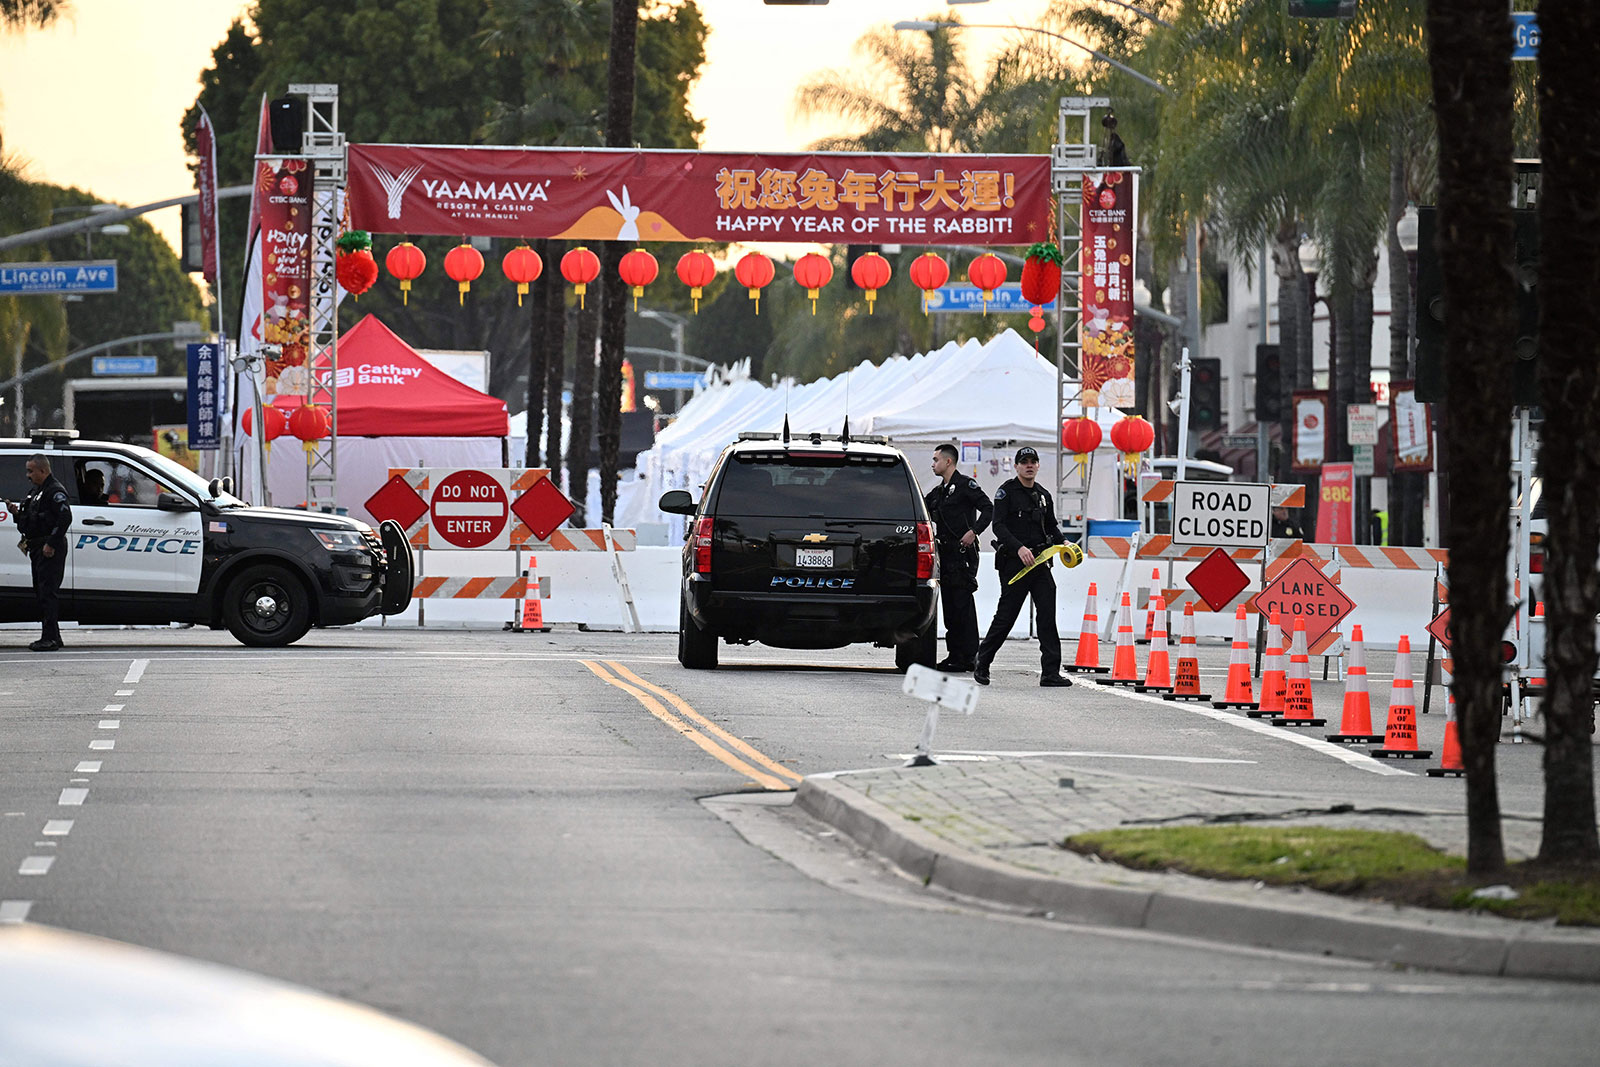 Here’s what we know about the deadly Monterey Park mass shooting